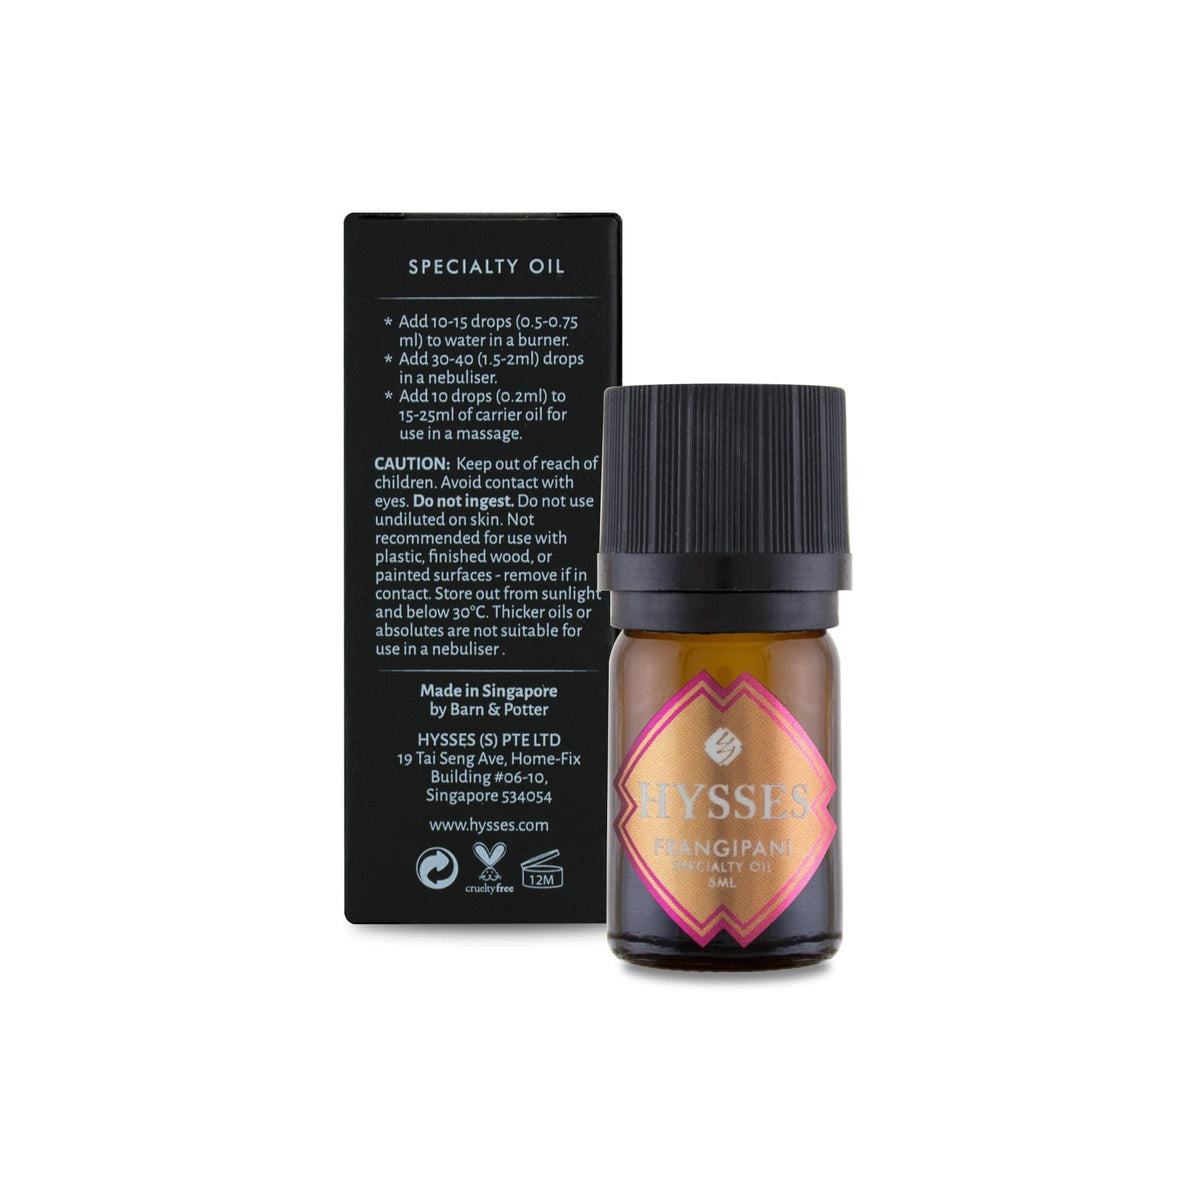 Hysses Essential Oil Specialty Oil Frangipani Absolute (25%)